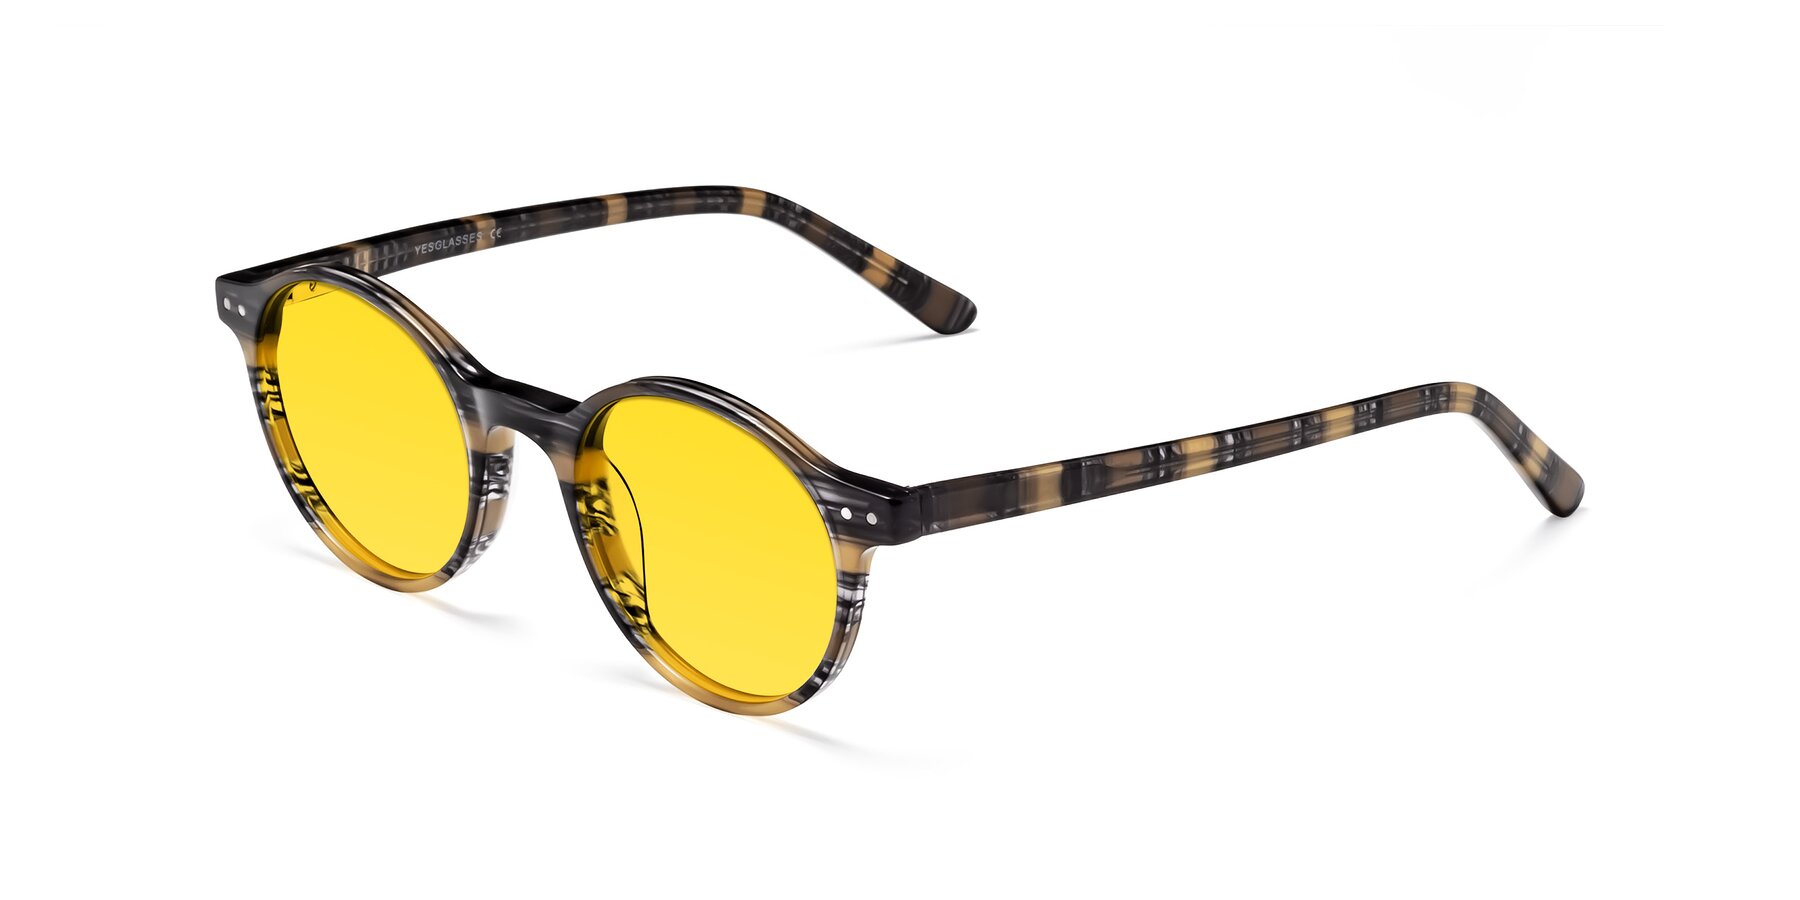 Angle of Jardi in Stripe Yellow Grey with Yellow Tinted Lenses